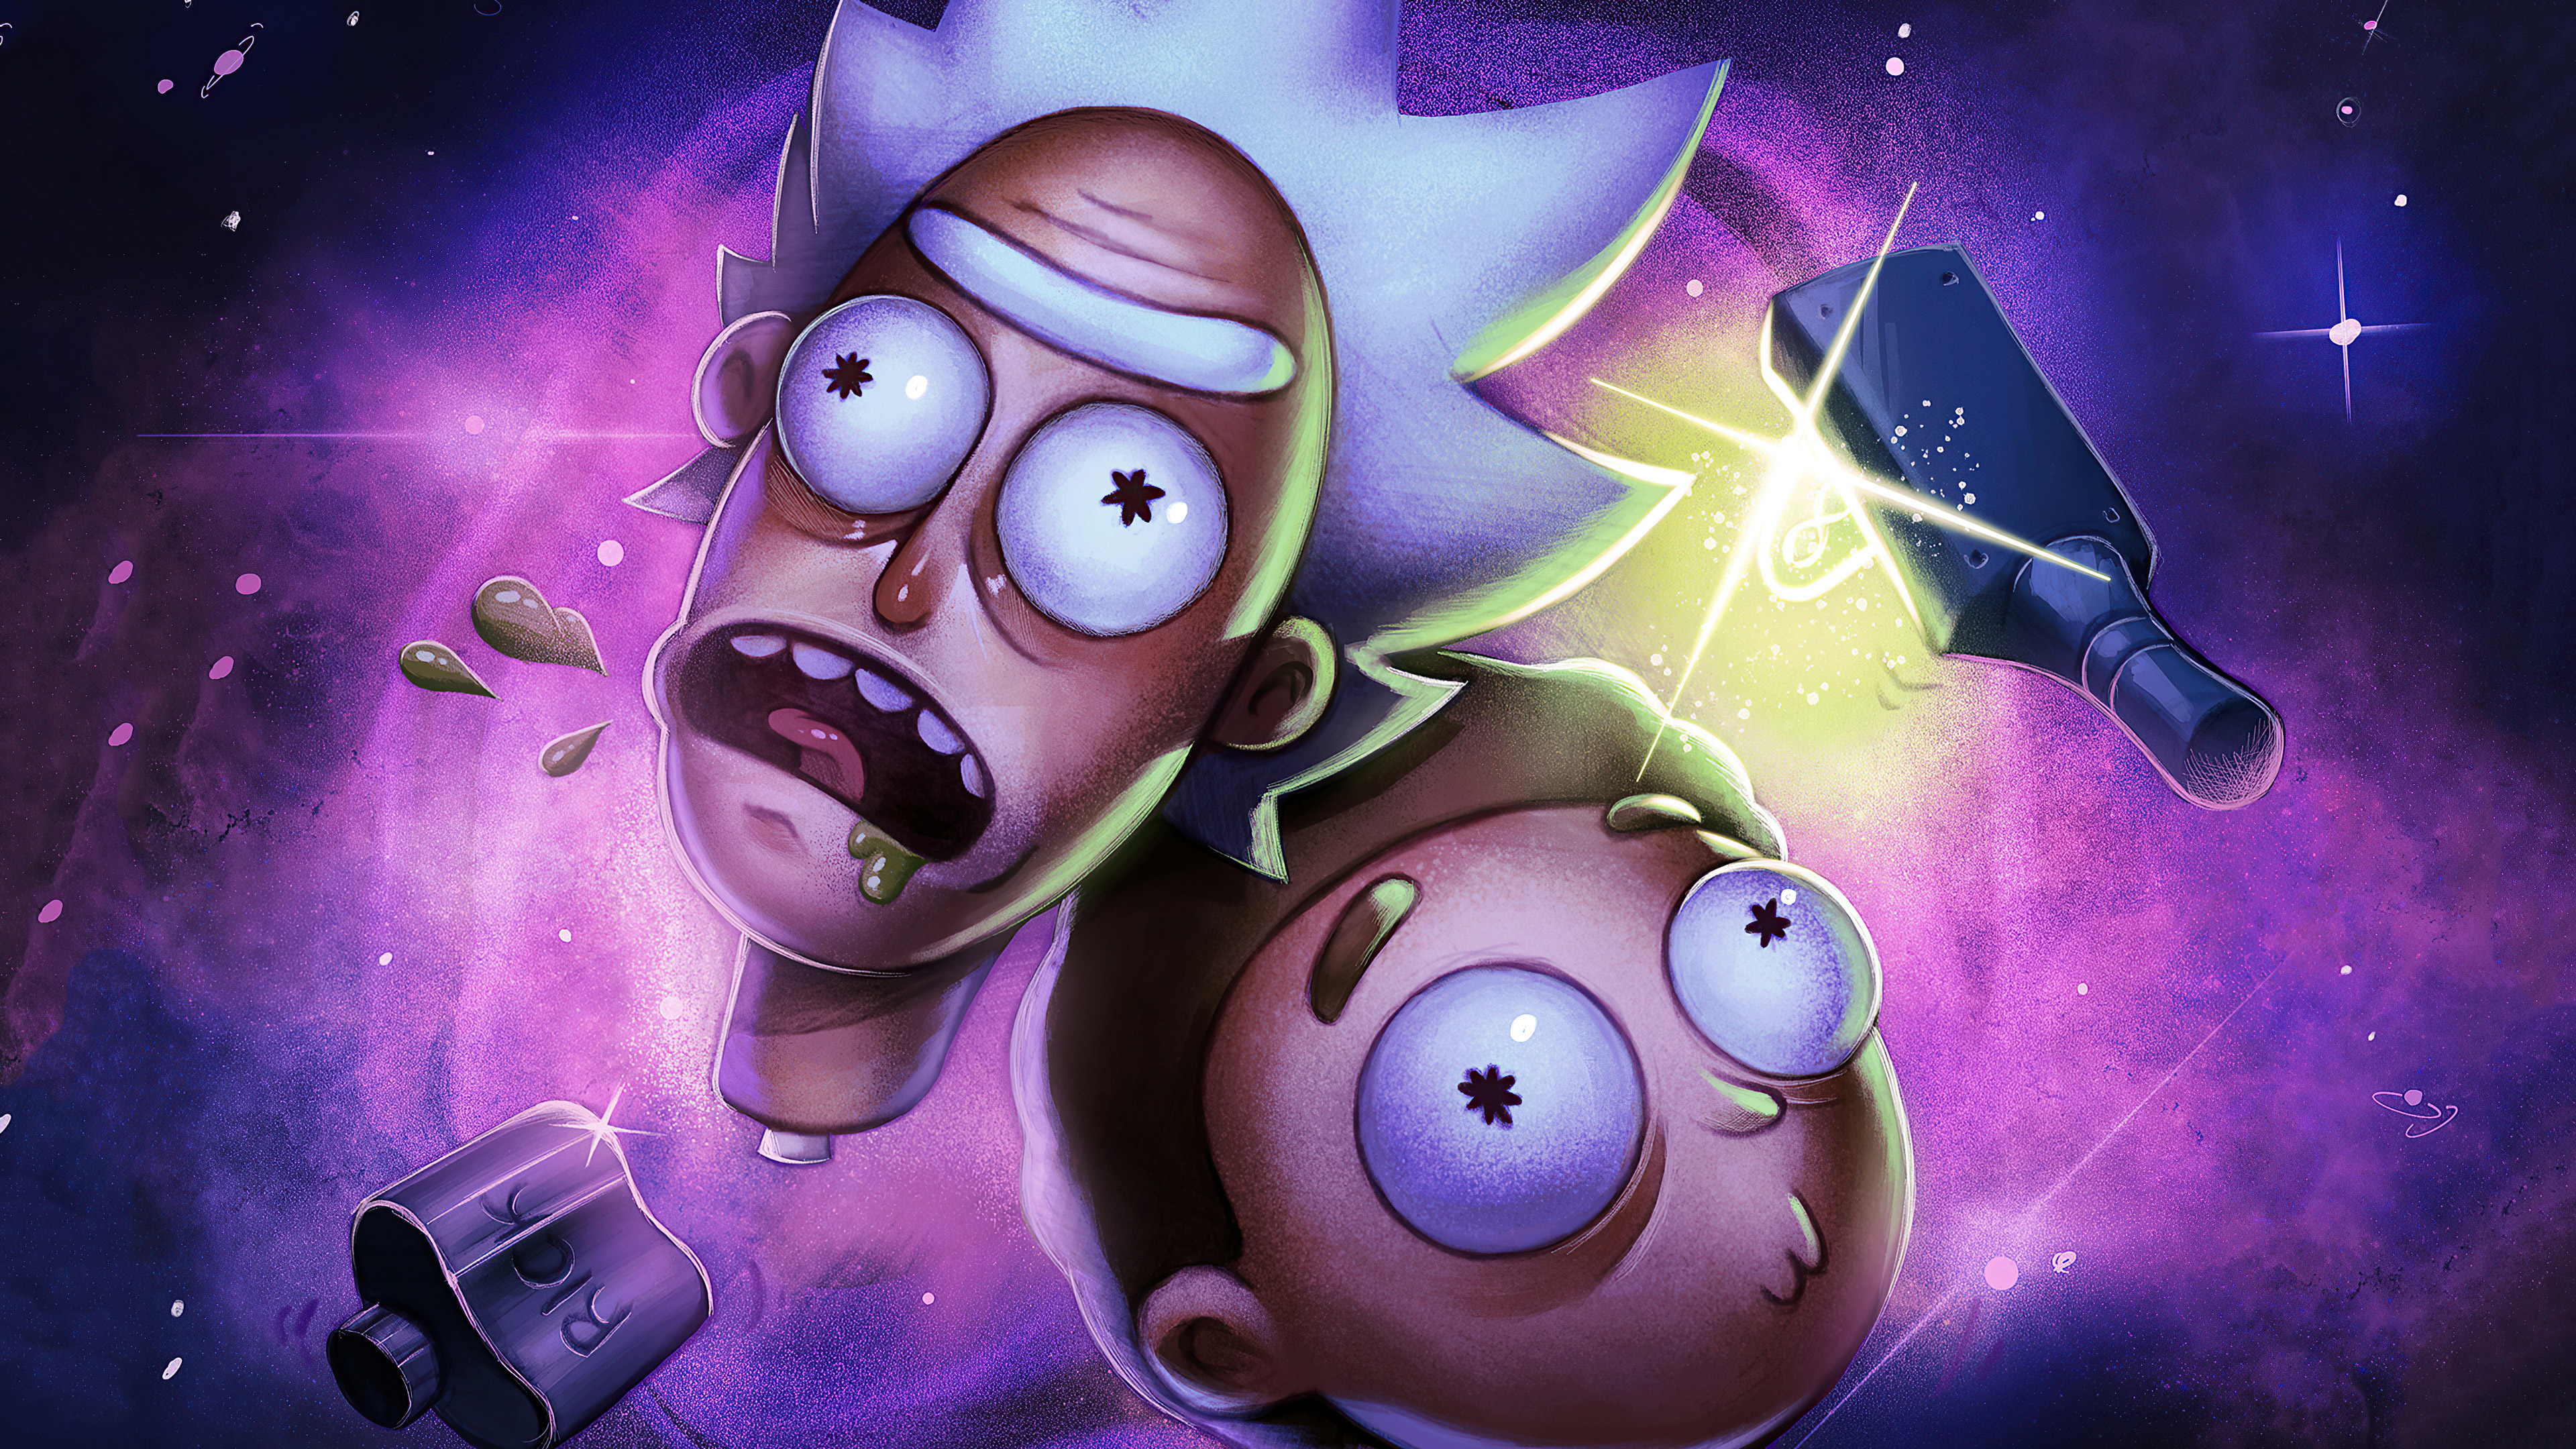 Wallpaper Rick And Morty 4k Pc Rick And Morty 4k Iphone Wallpapers